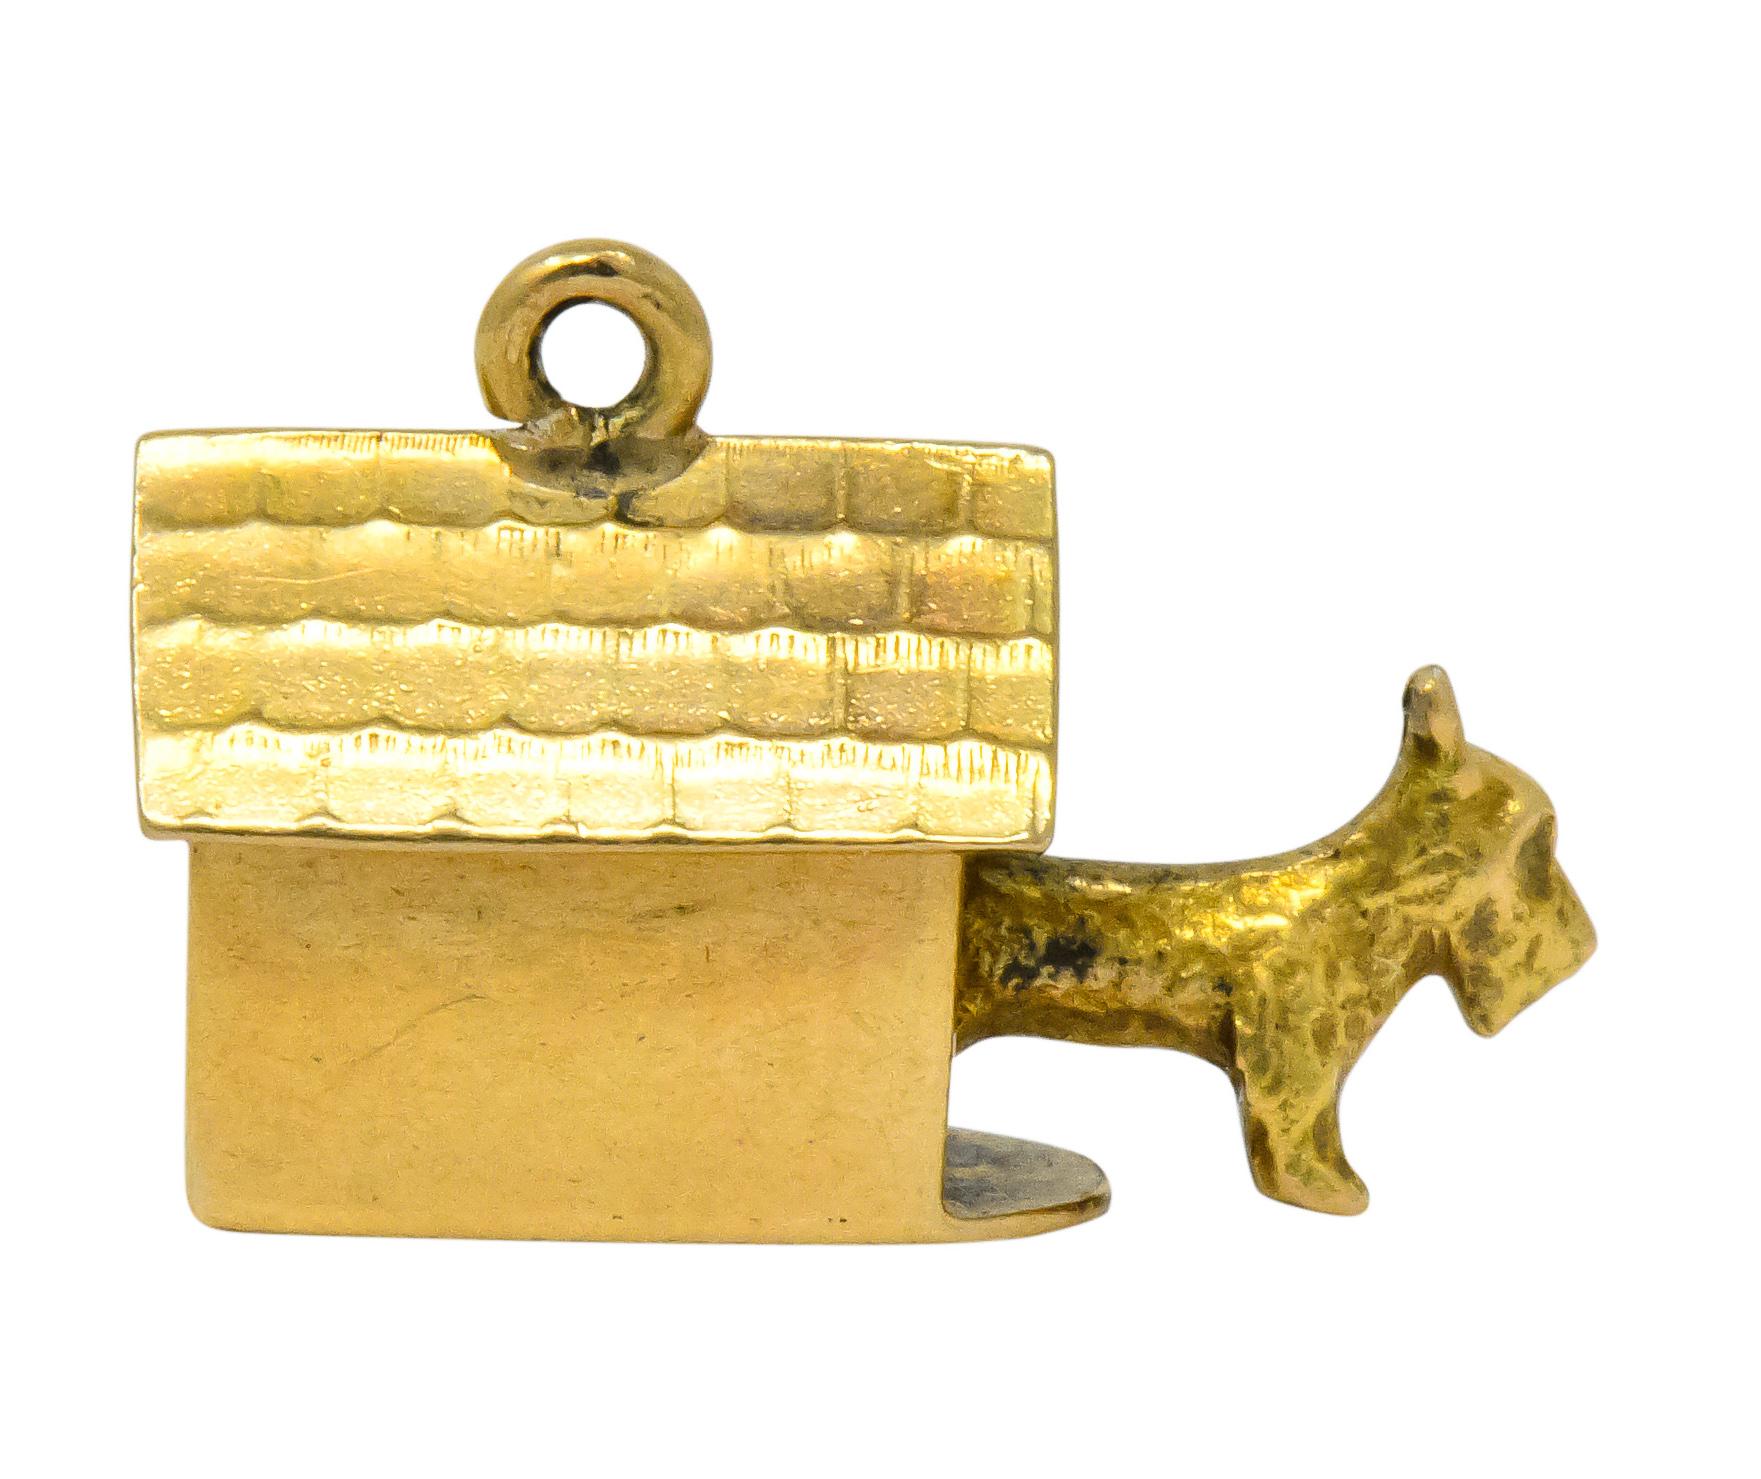 Charm designed as a doghouse with engraved shingles and an articulated Scottish Terrier joyfully peaking out

Completed by jump ring atop pitched roof

Stamped 14k for 14 karat gold

Circa 1910

Measures: approx. 1/4 x 5/8 (with dog fully extended)